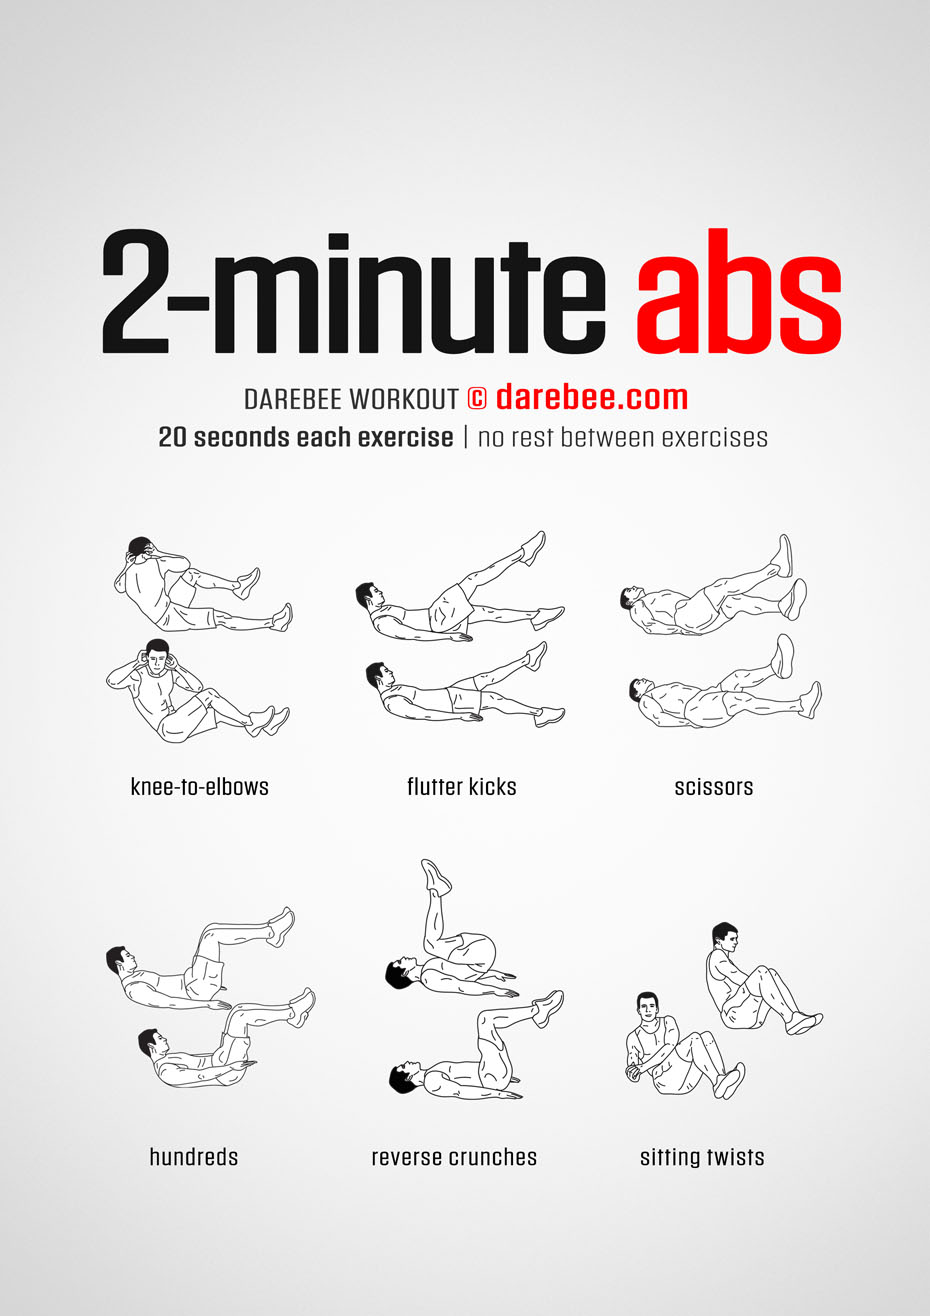 https://darebee.com/images/workouts/2minute-abs-workout.jpg